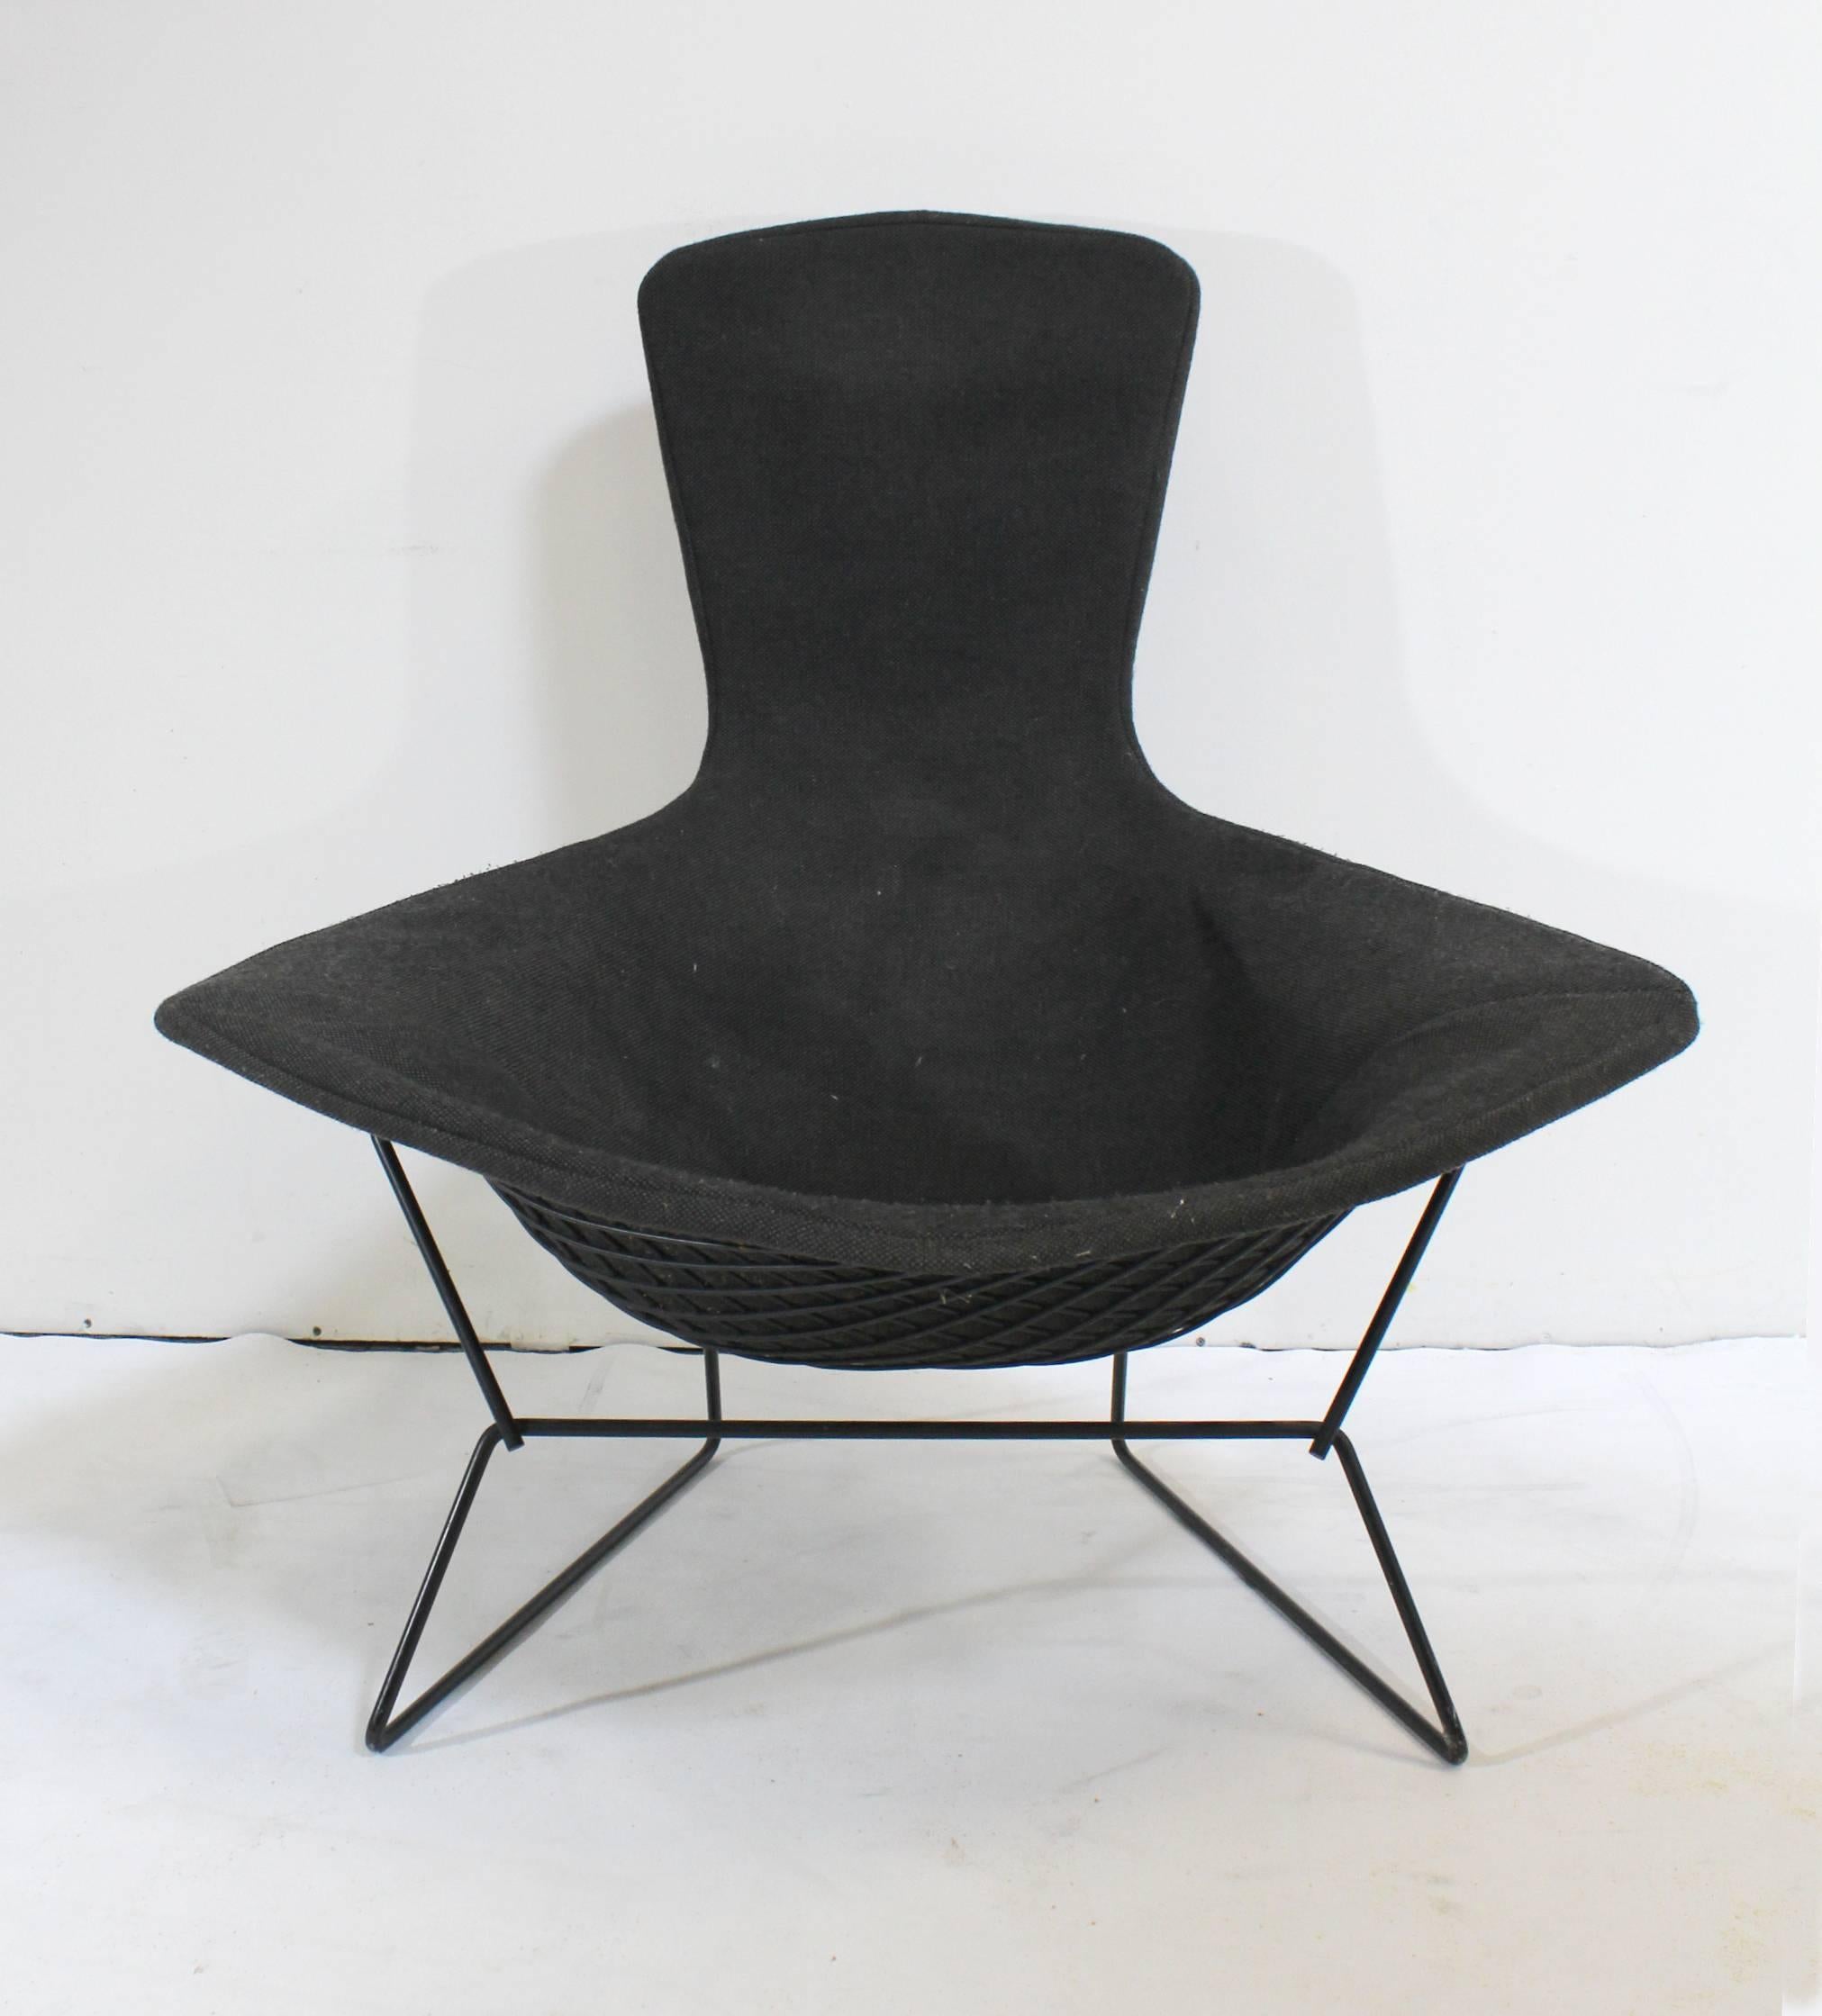 The 'Bird' chair was designed by Harry Bertoia for Knoll in 1952. This piece probably dates from the 1970s. Classic Mid-Century accent chair. Charcoal black removable upholstery on black frame. Ottoman has original Knoll tag (see